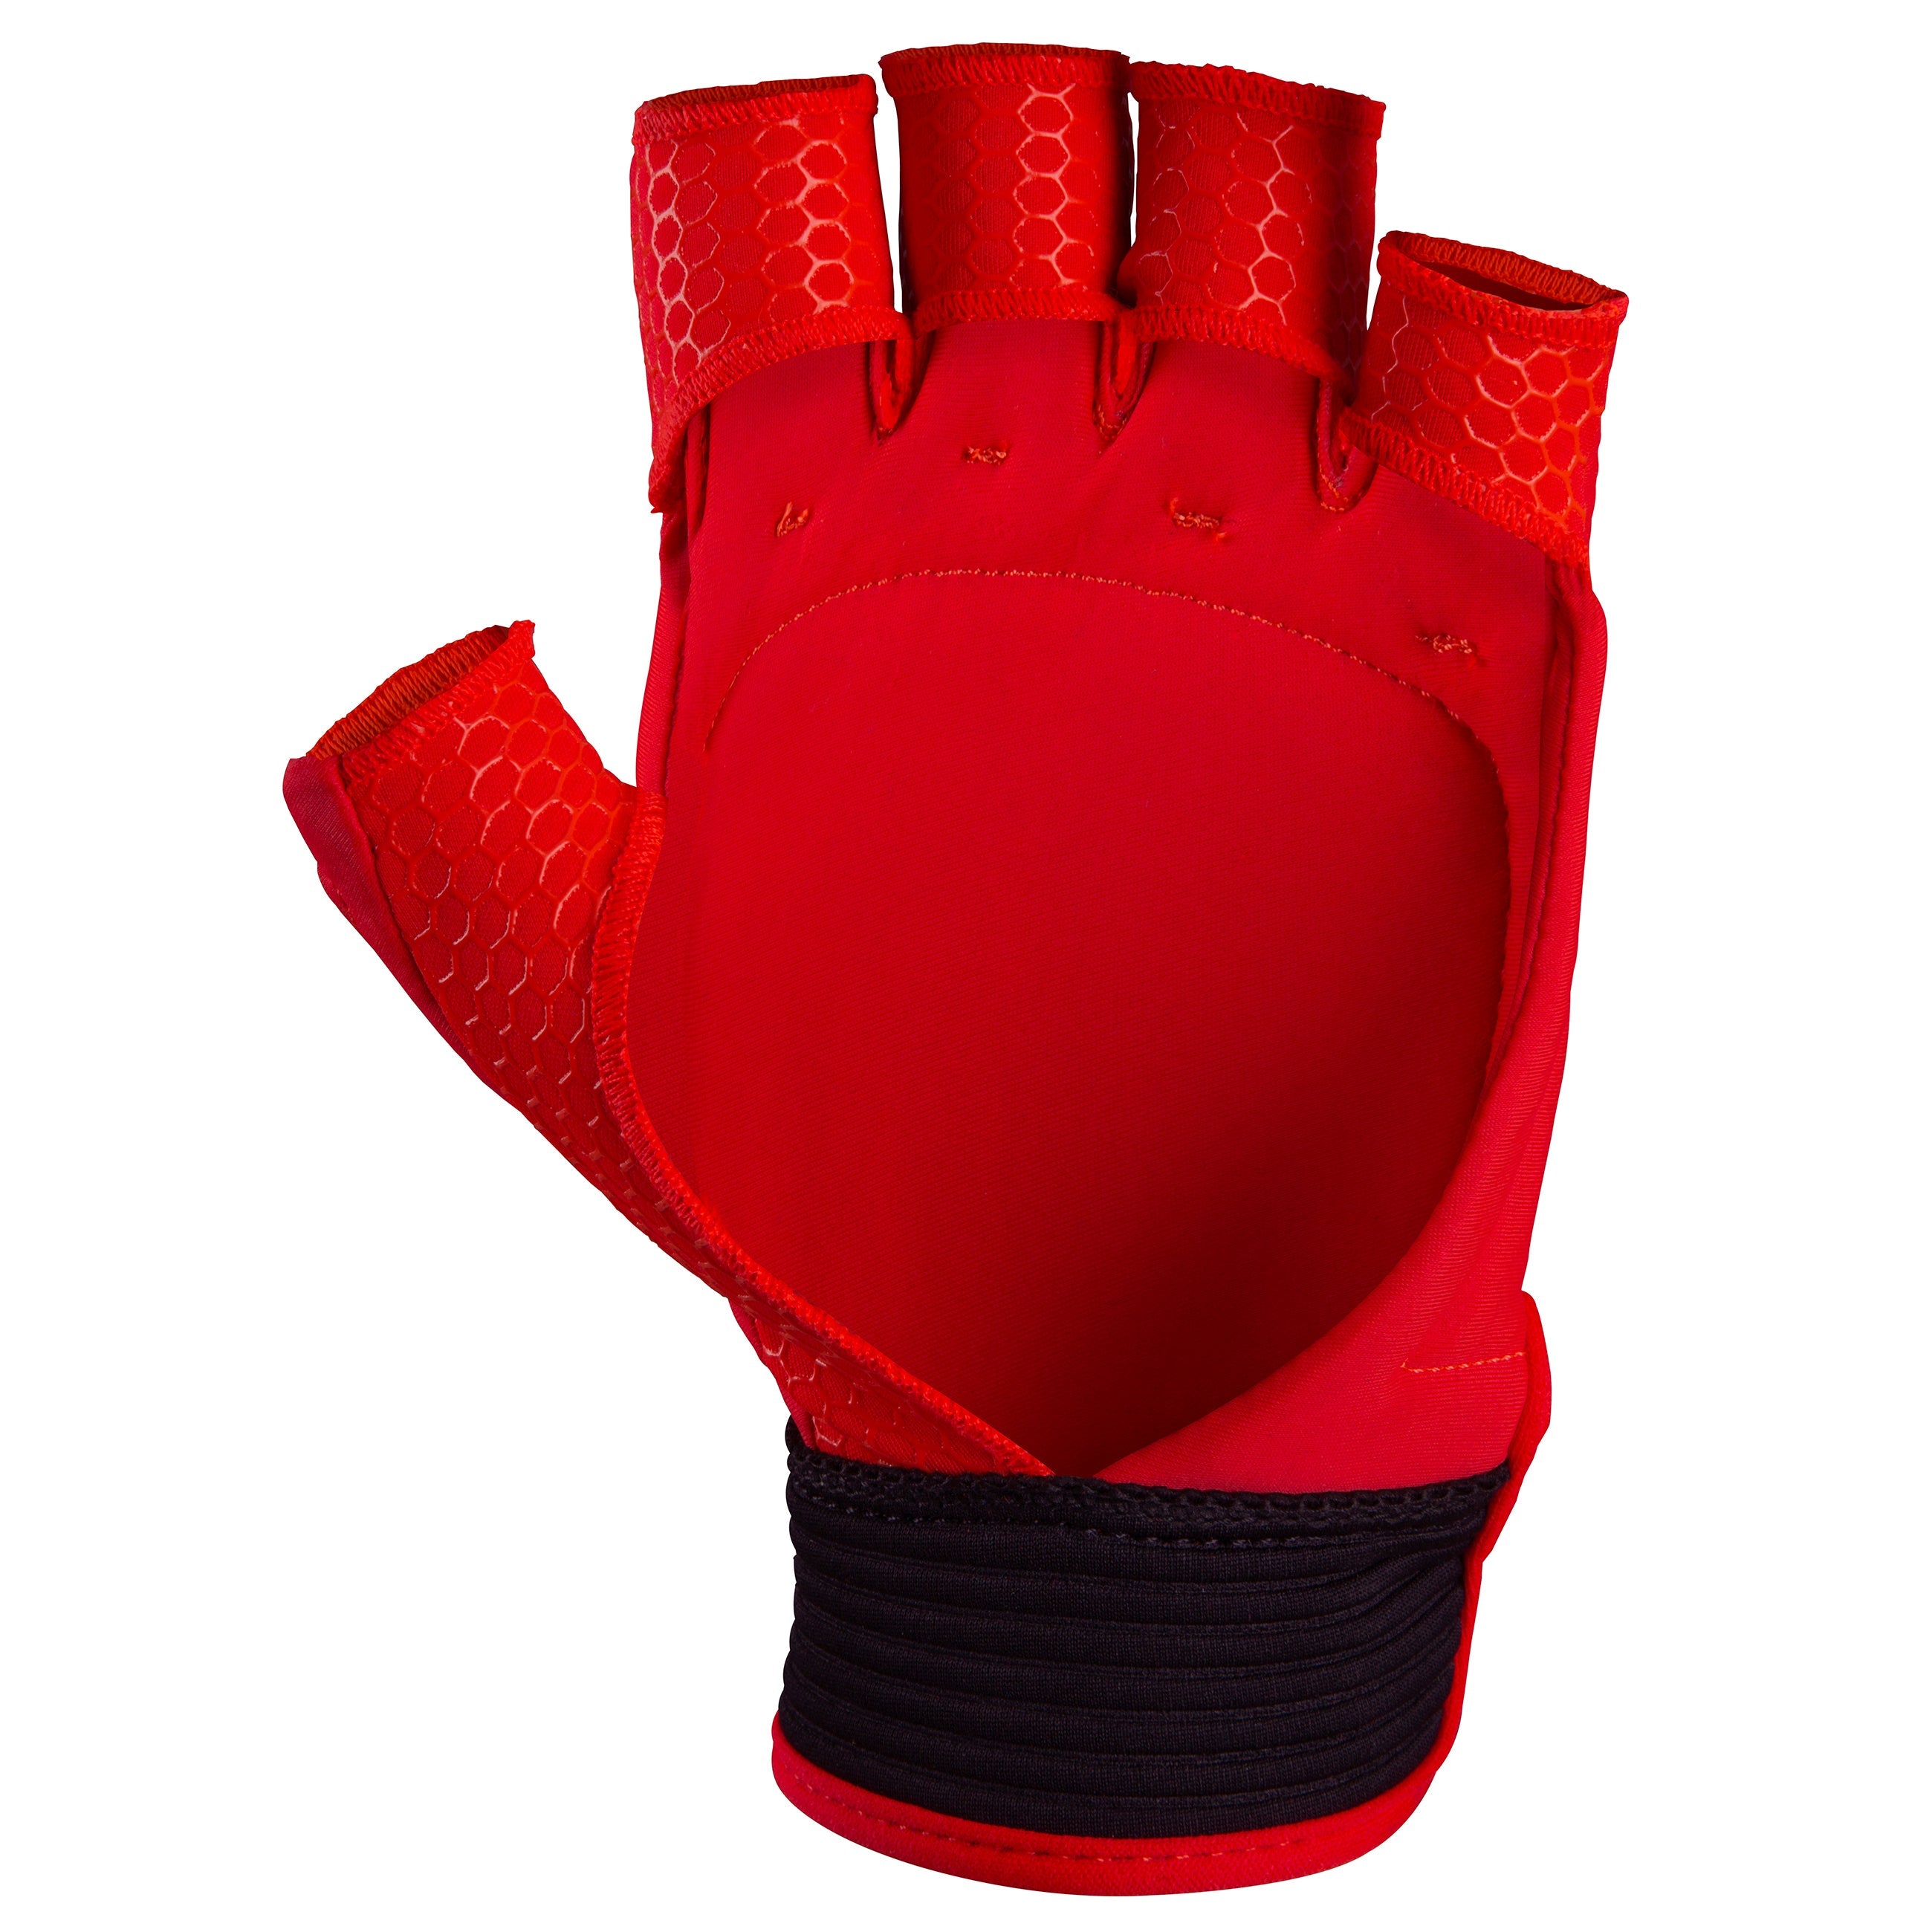 2600 HGFA19 6208905 Glove Touch Fluo Red, Left Hand Palm